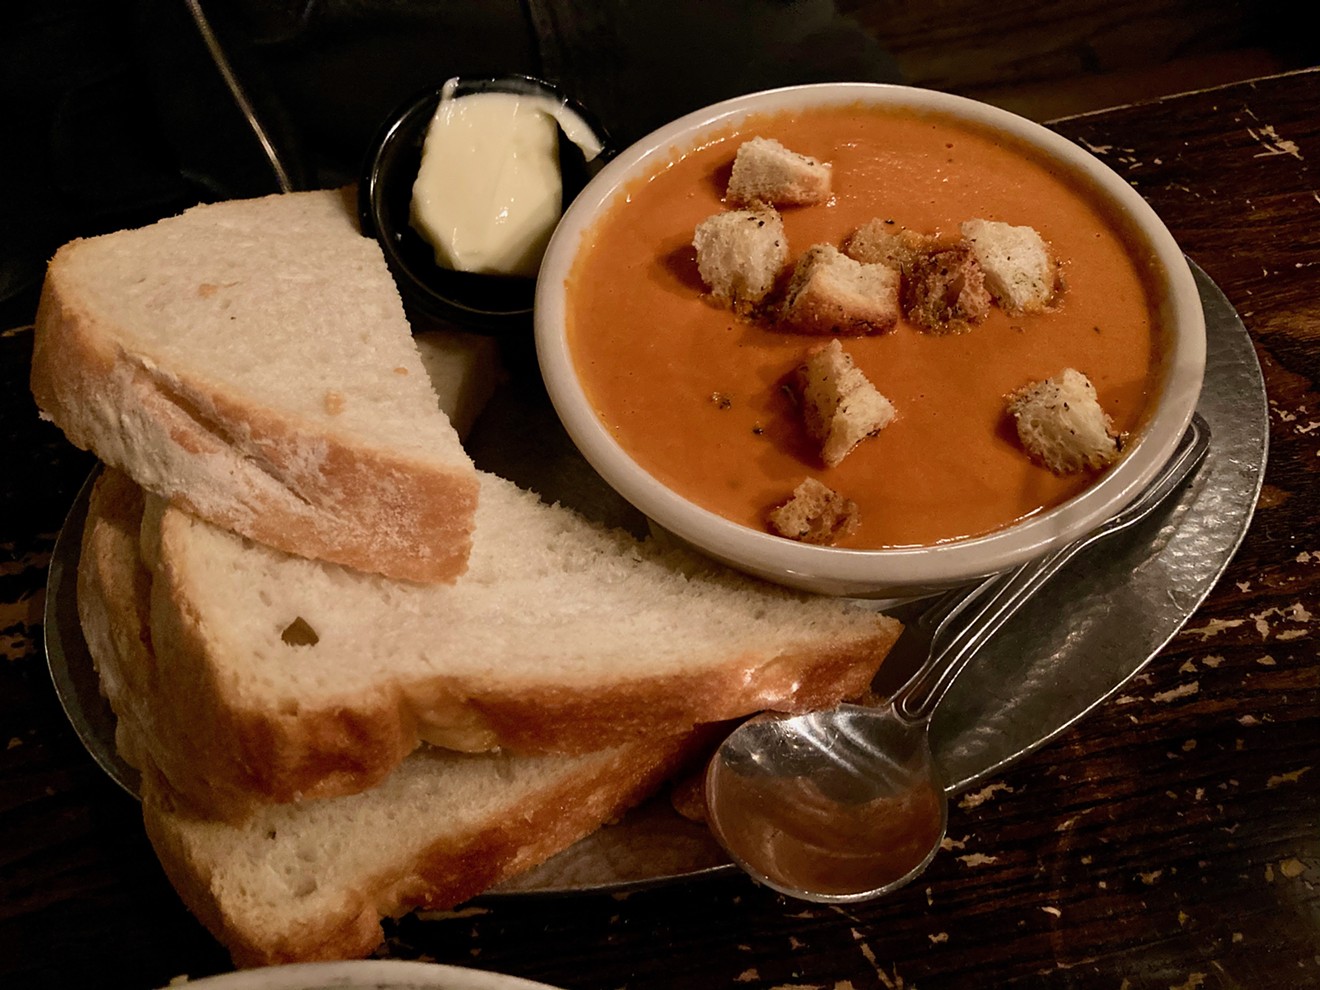 The cream of tomato soup with croutons and housemade bread at Cornish Pasty Co.